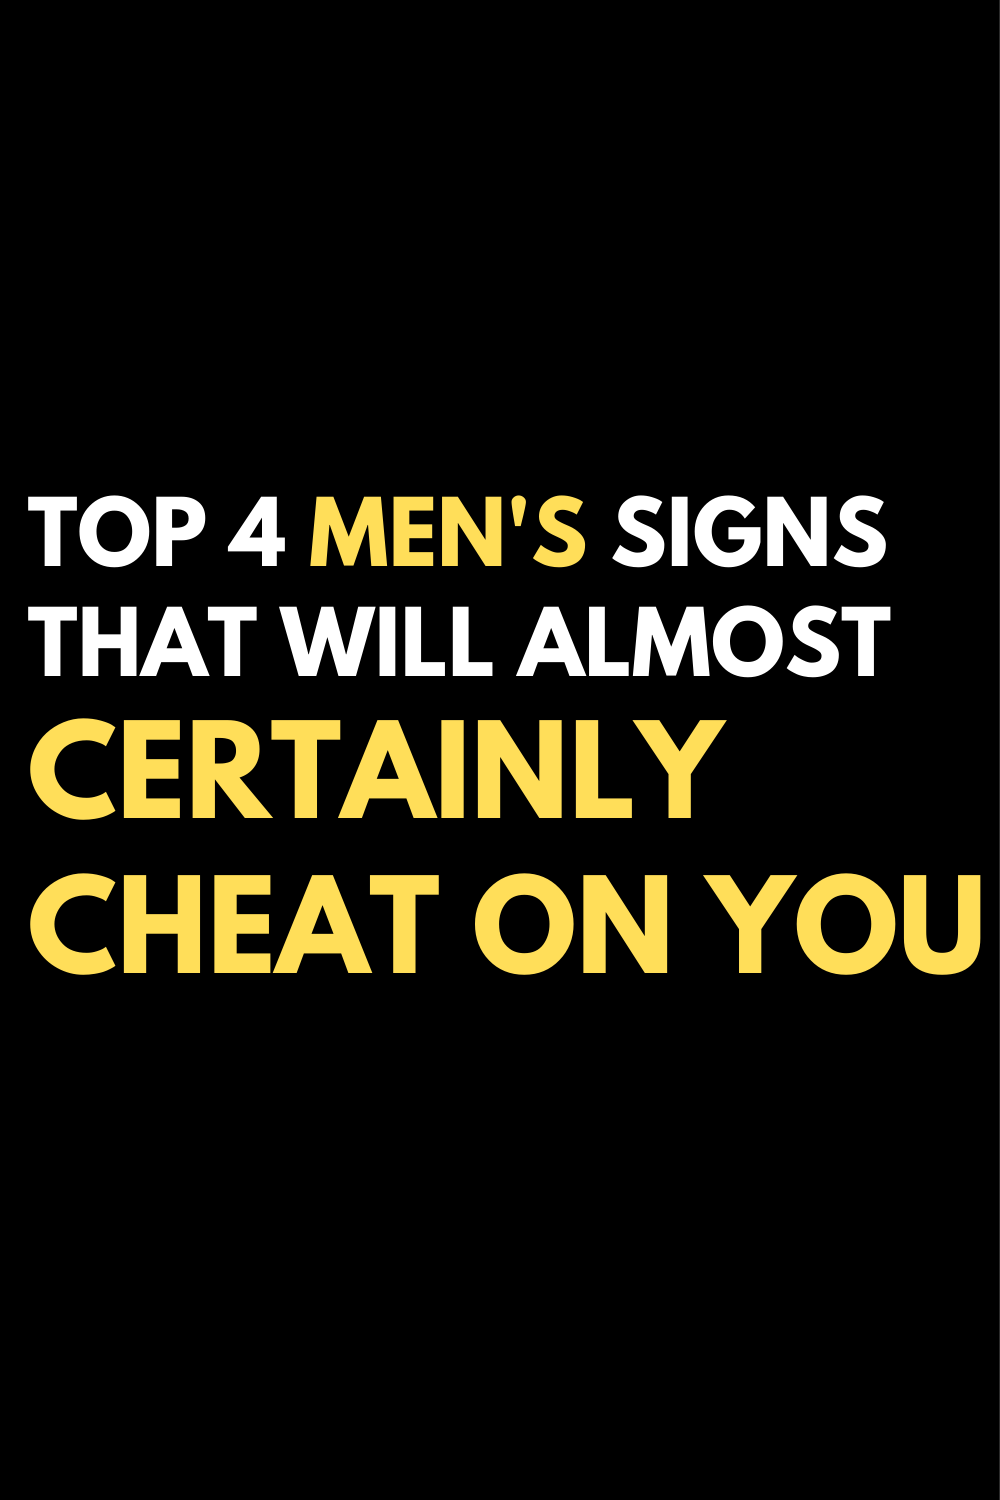 Top 4 men's signs that will almost certainly cheat on you